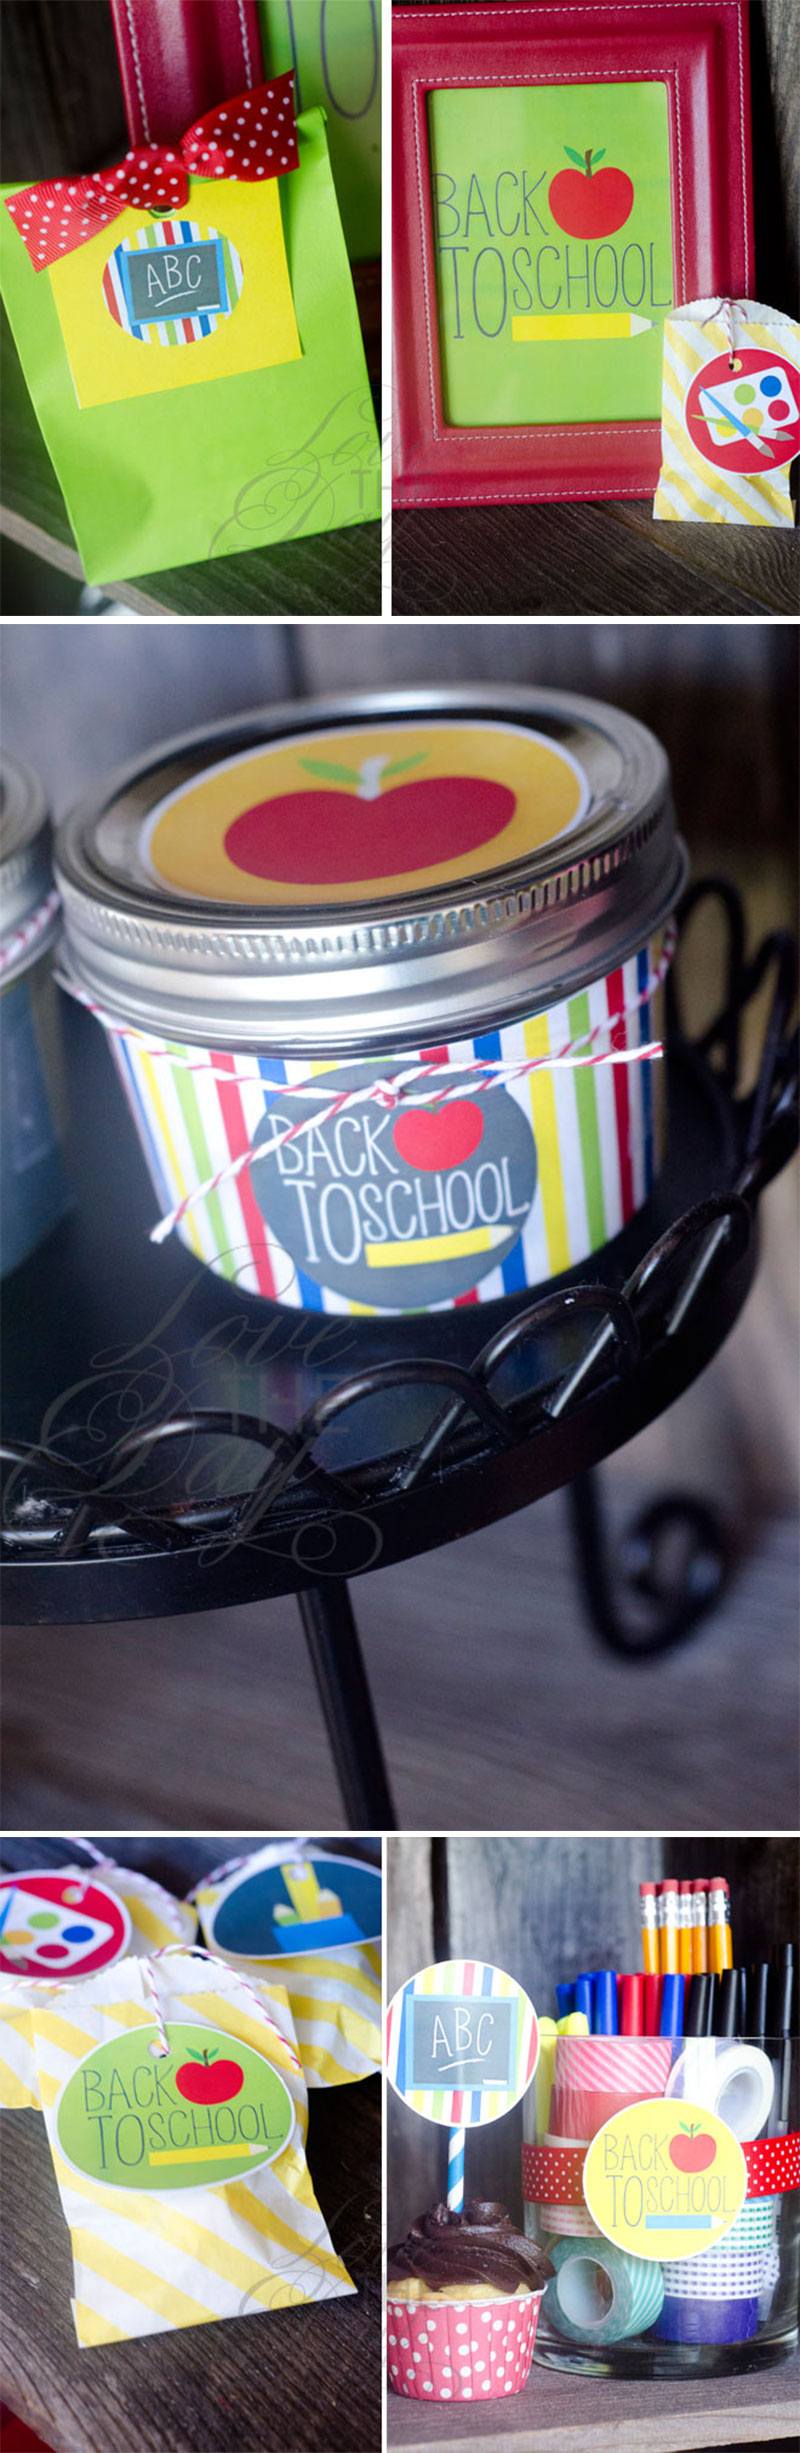 Back To School Party Ideas by Lindi Haws of Love The Day